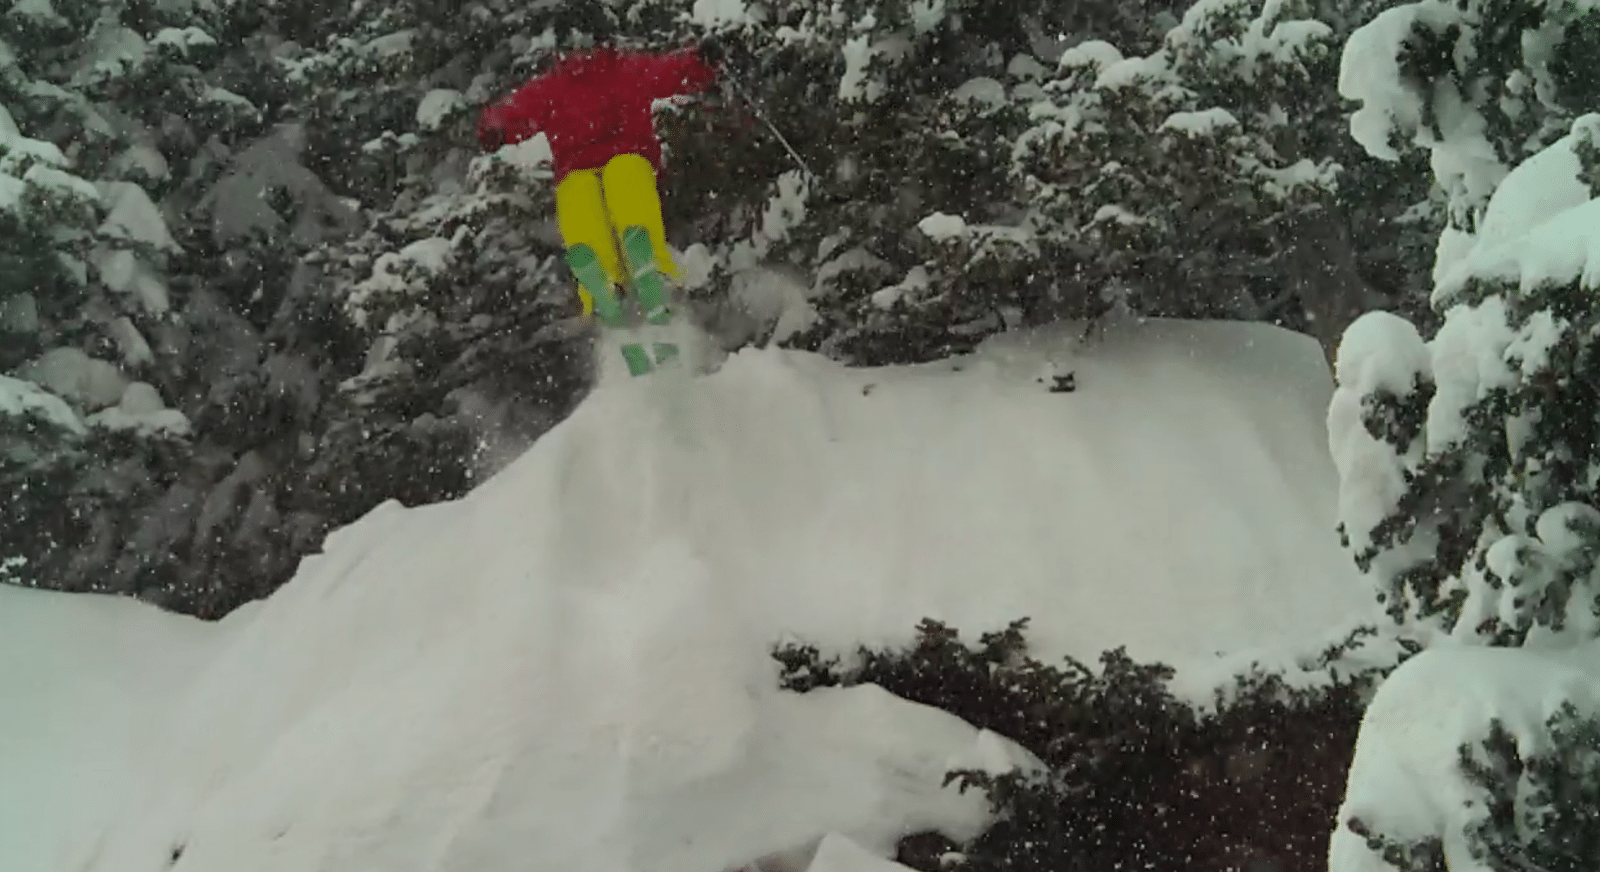 Pow in Vail